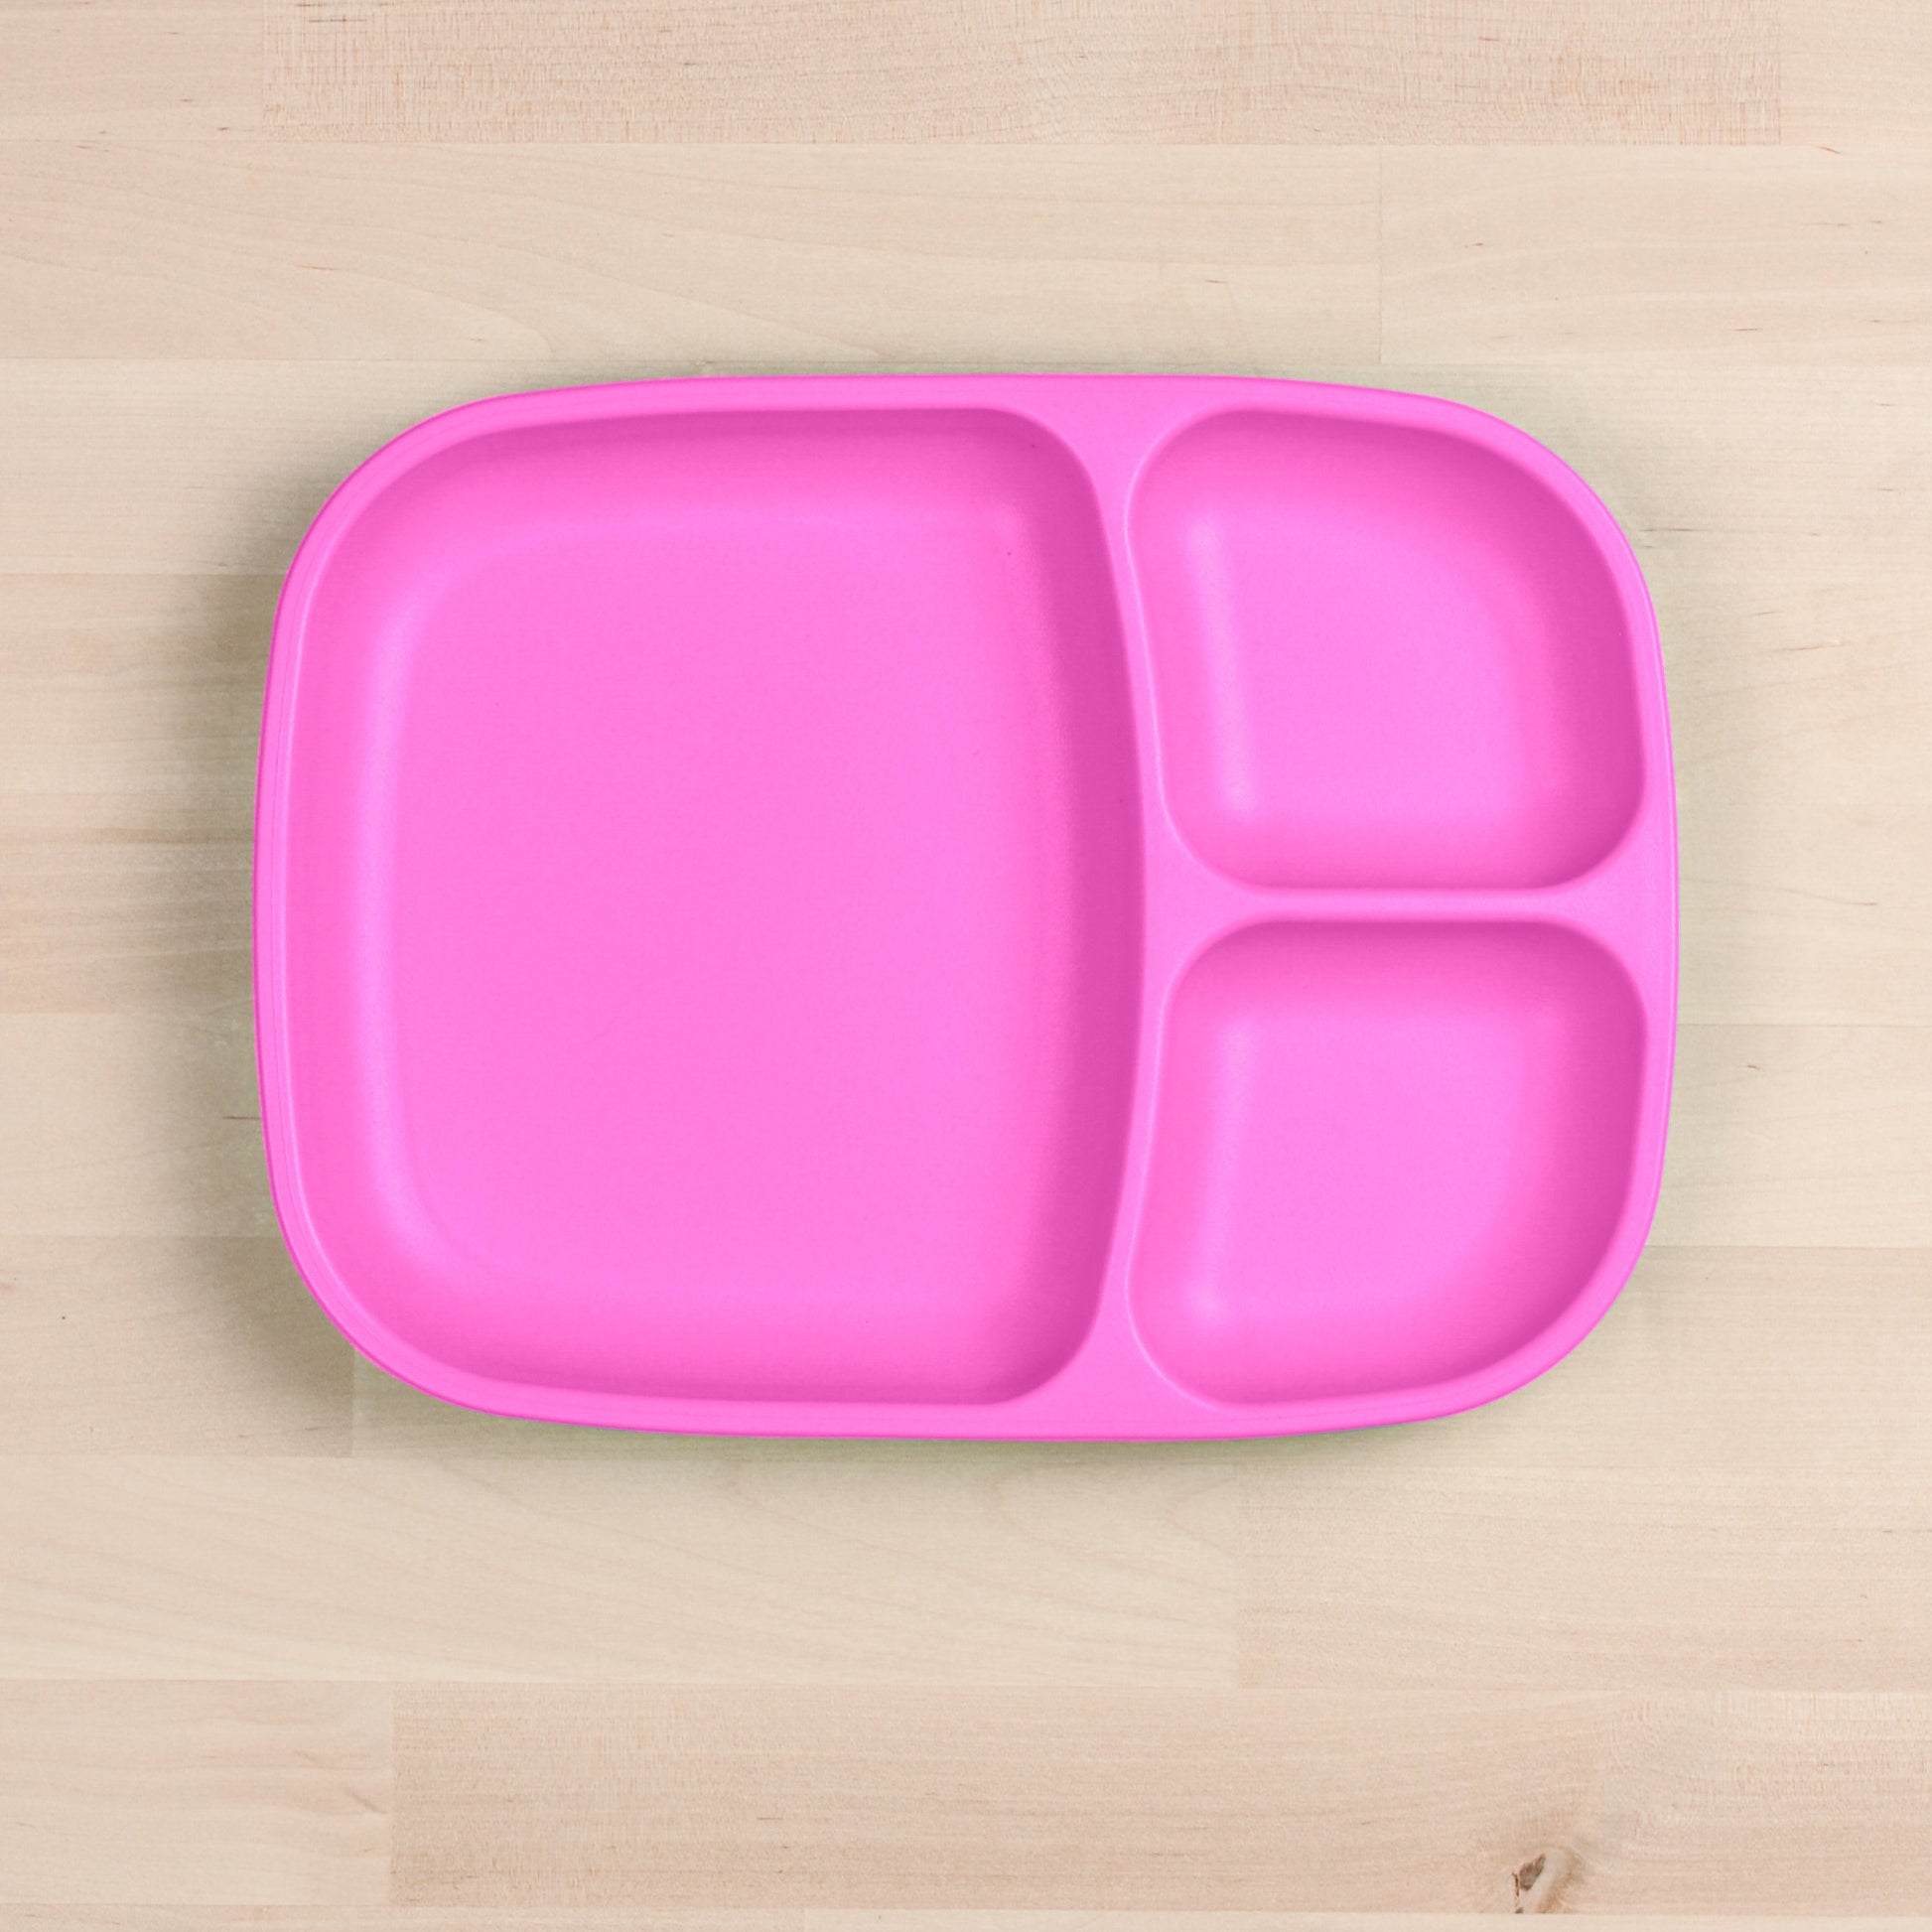 Re-Play Divided Tray in Bright Pink from Bear & Moo